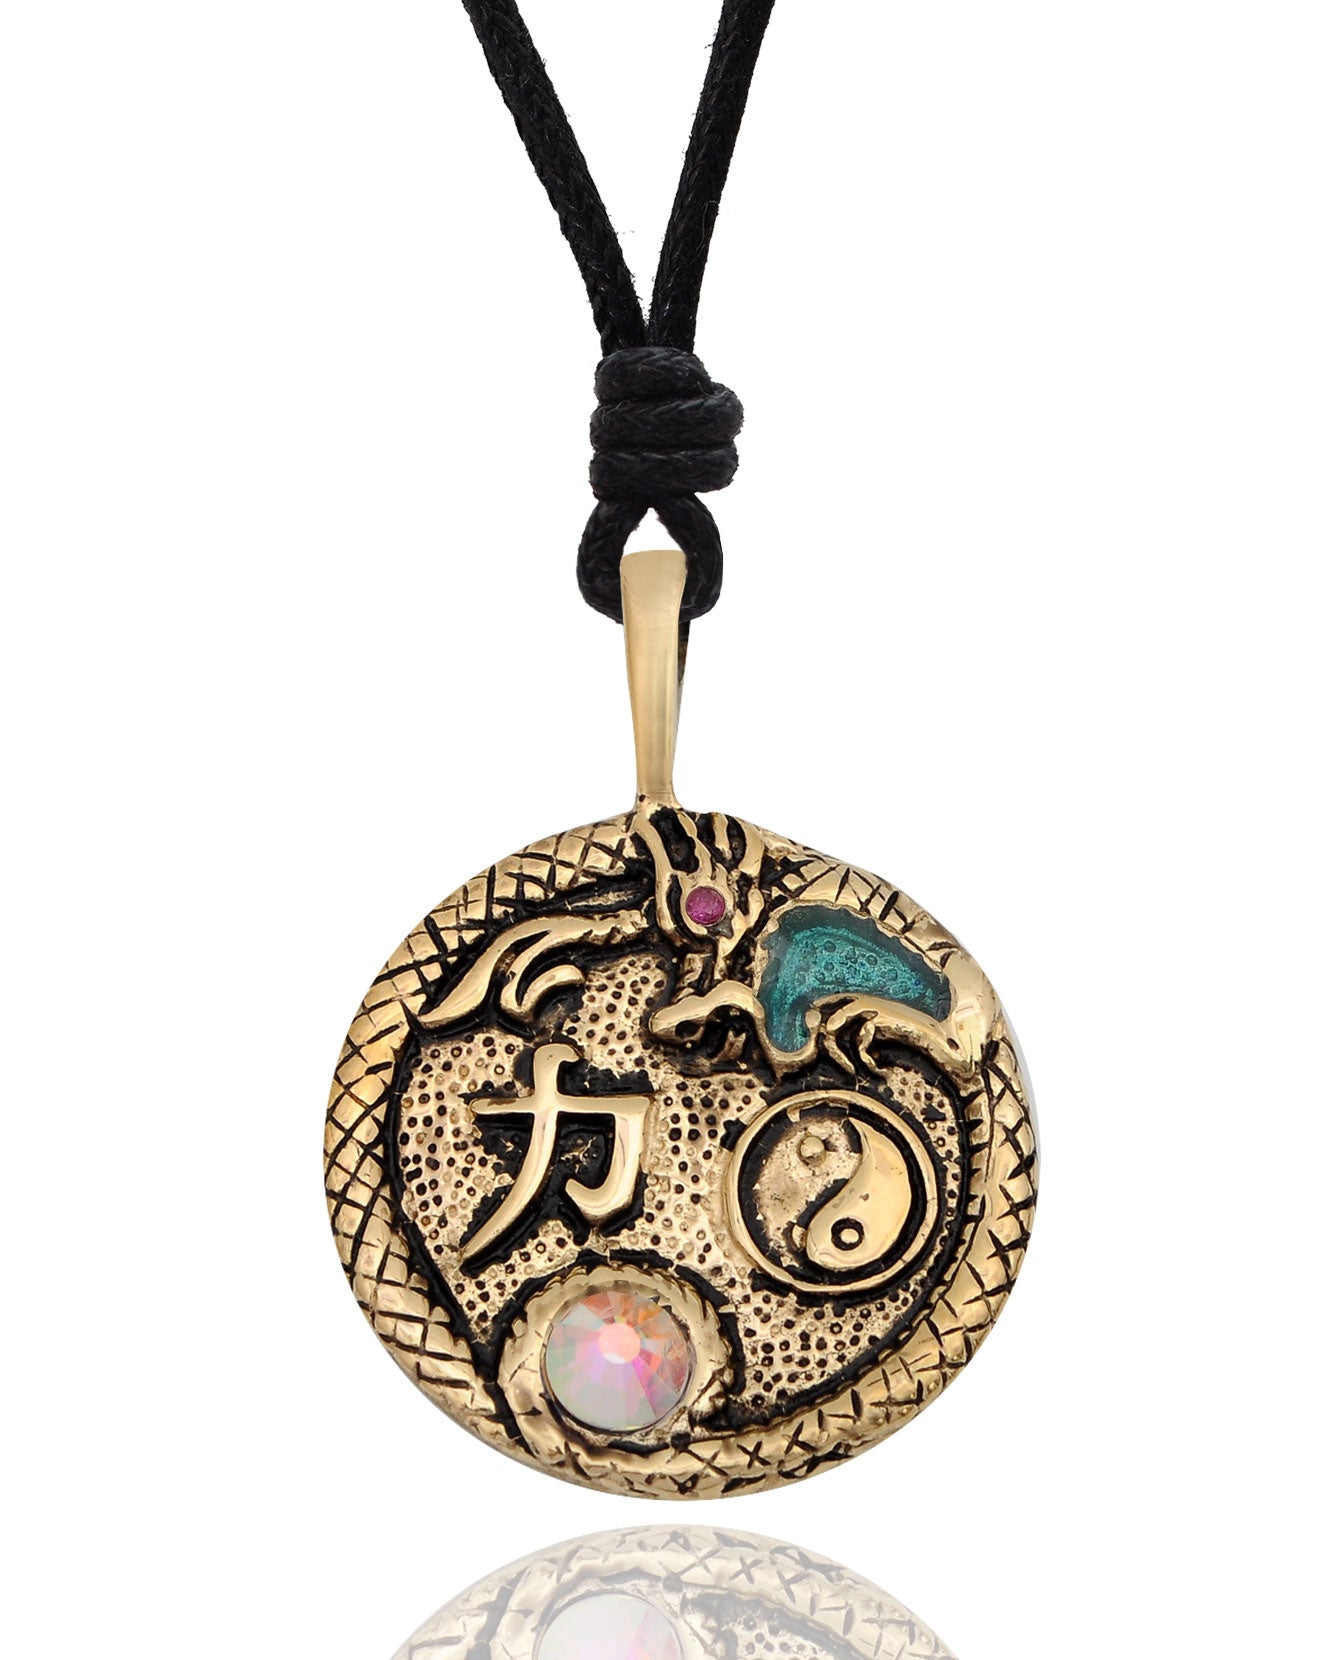 Crystal Dragon Yin Yang Silver Pewter Gold Brass Pewter Necklace Pendant Jewelry